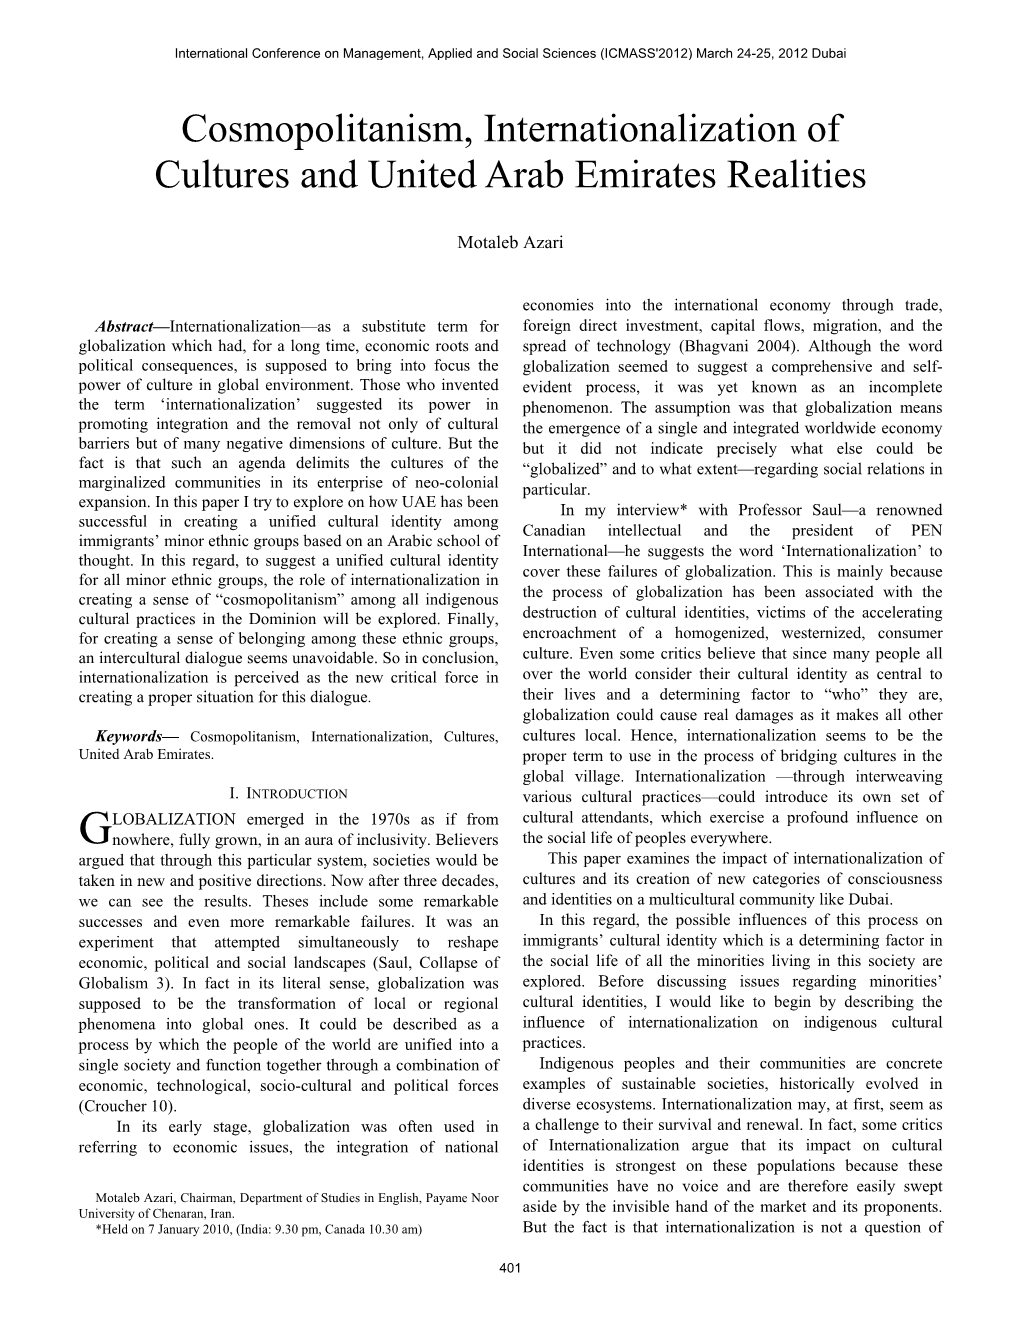 Cosmopolitanism, Internationalization of Cultures and United Arab Emirates Realities